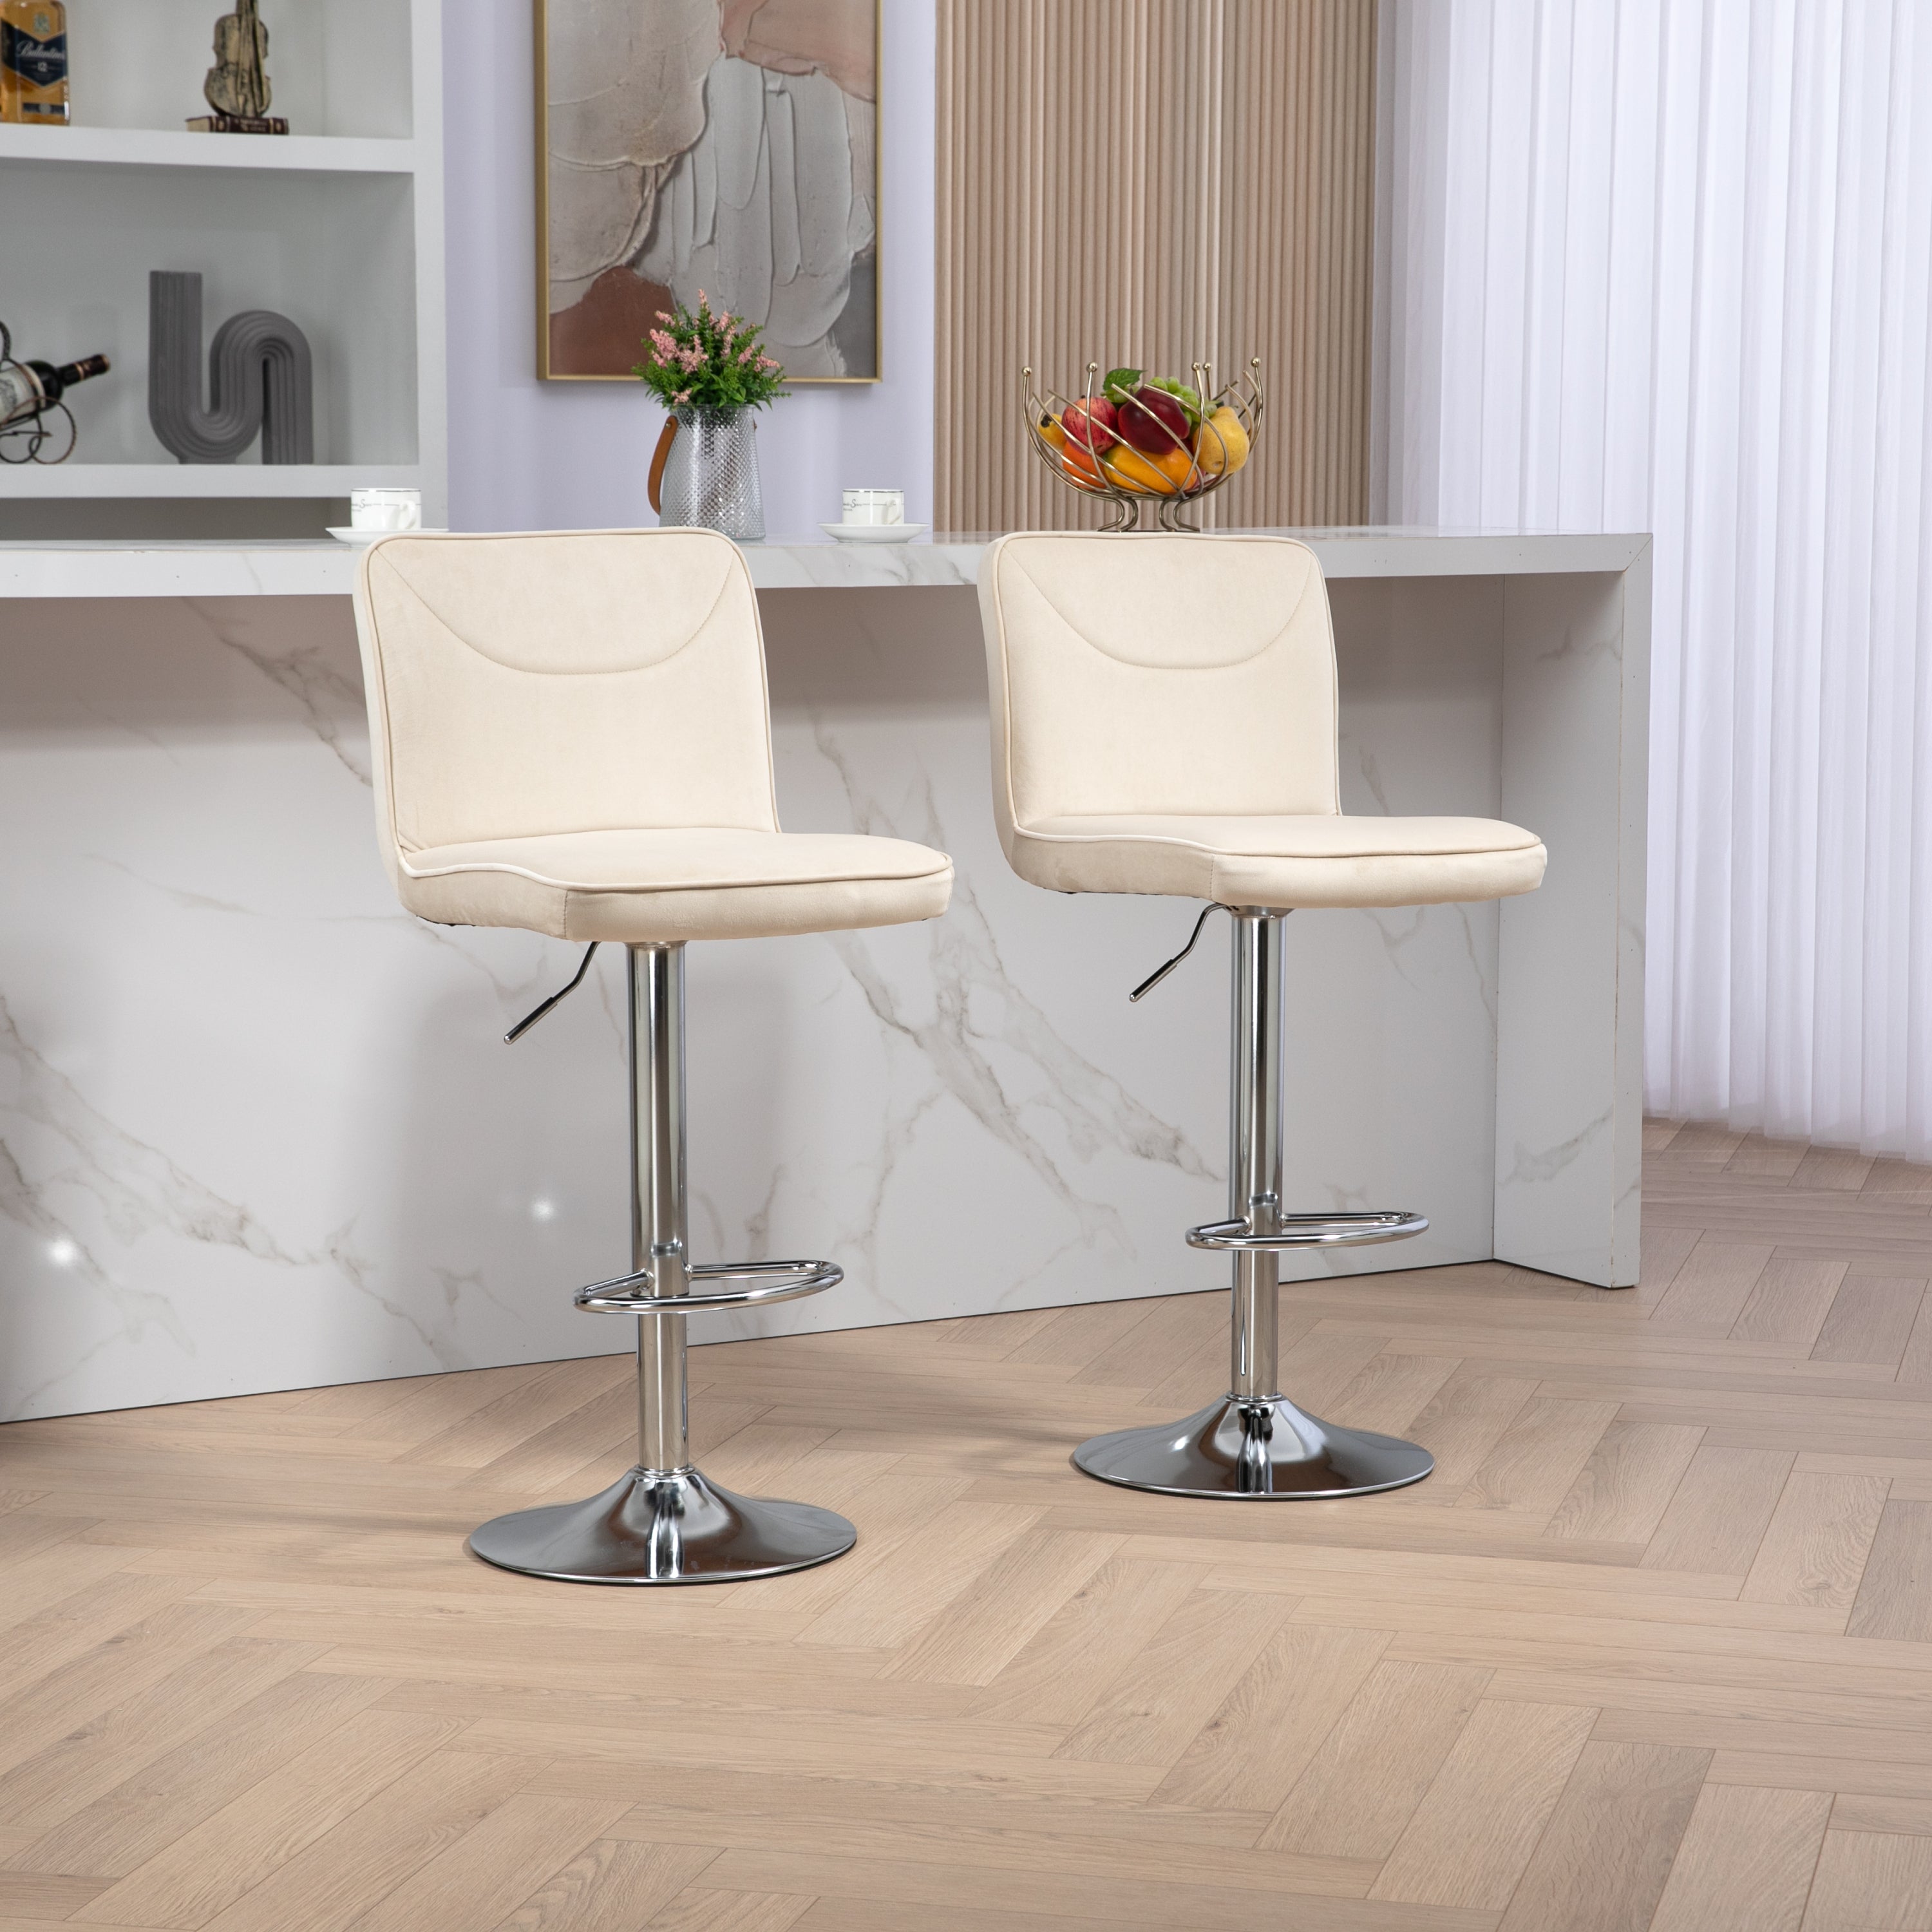 🆓🚛 Modern Swivel Bar stools Set of 2, Adjustable Counter Height Bar Chairs, with Backrest Footrest, Chrome Base, Ivory